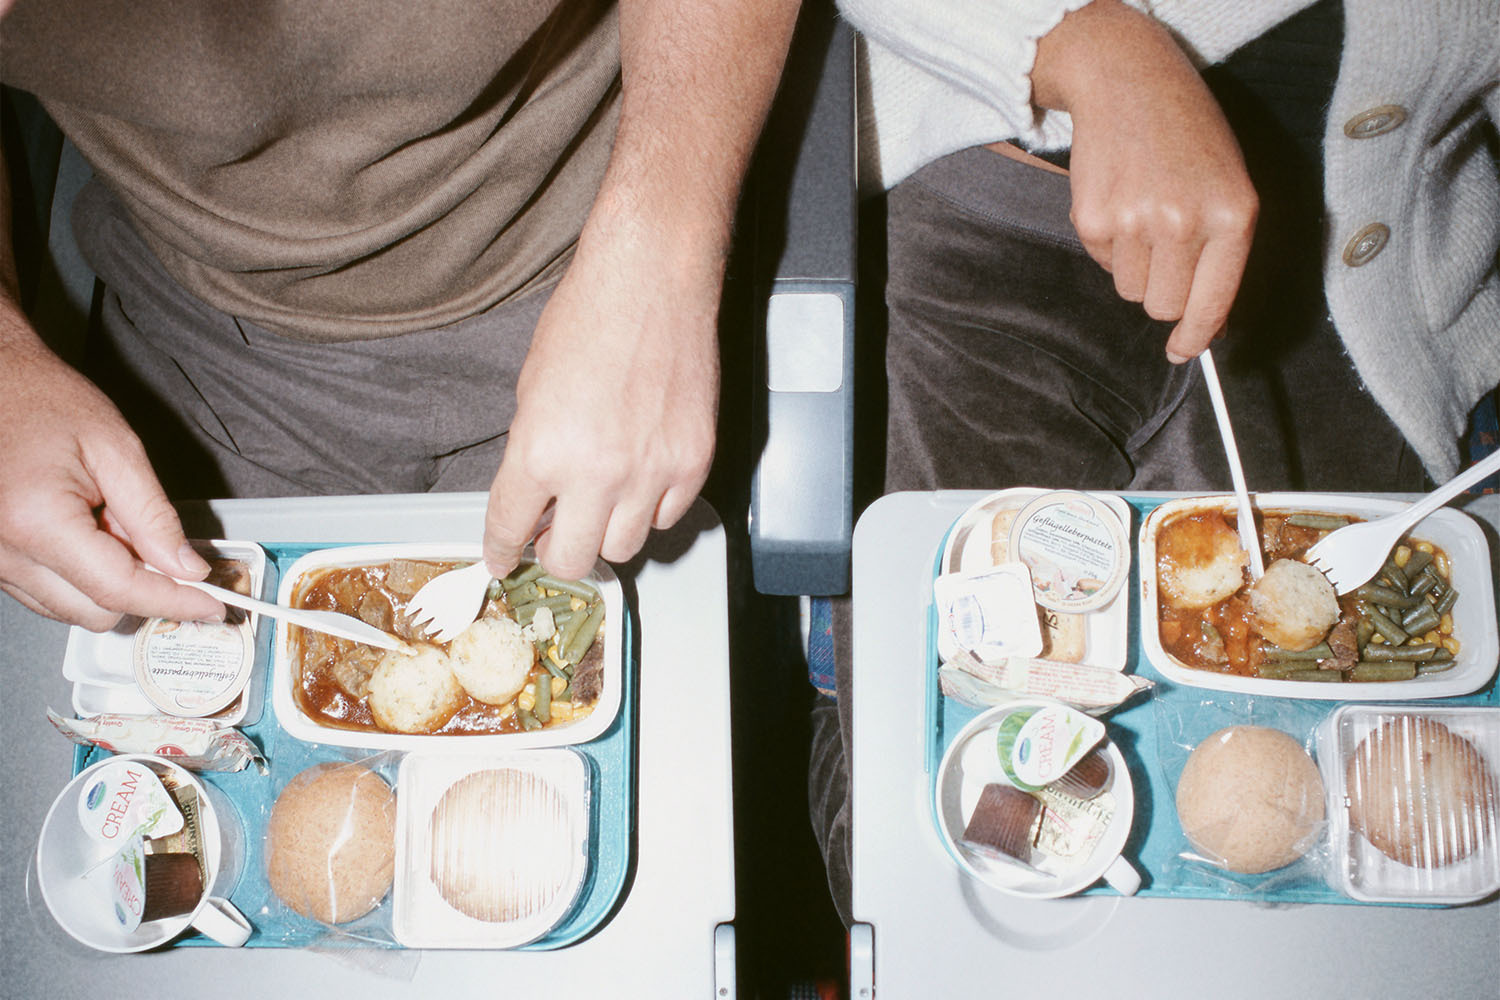 An Answer to the Age-Old Question: Why Does Airplane Food Suck So Bad?